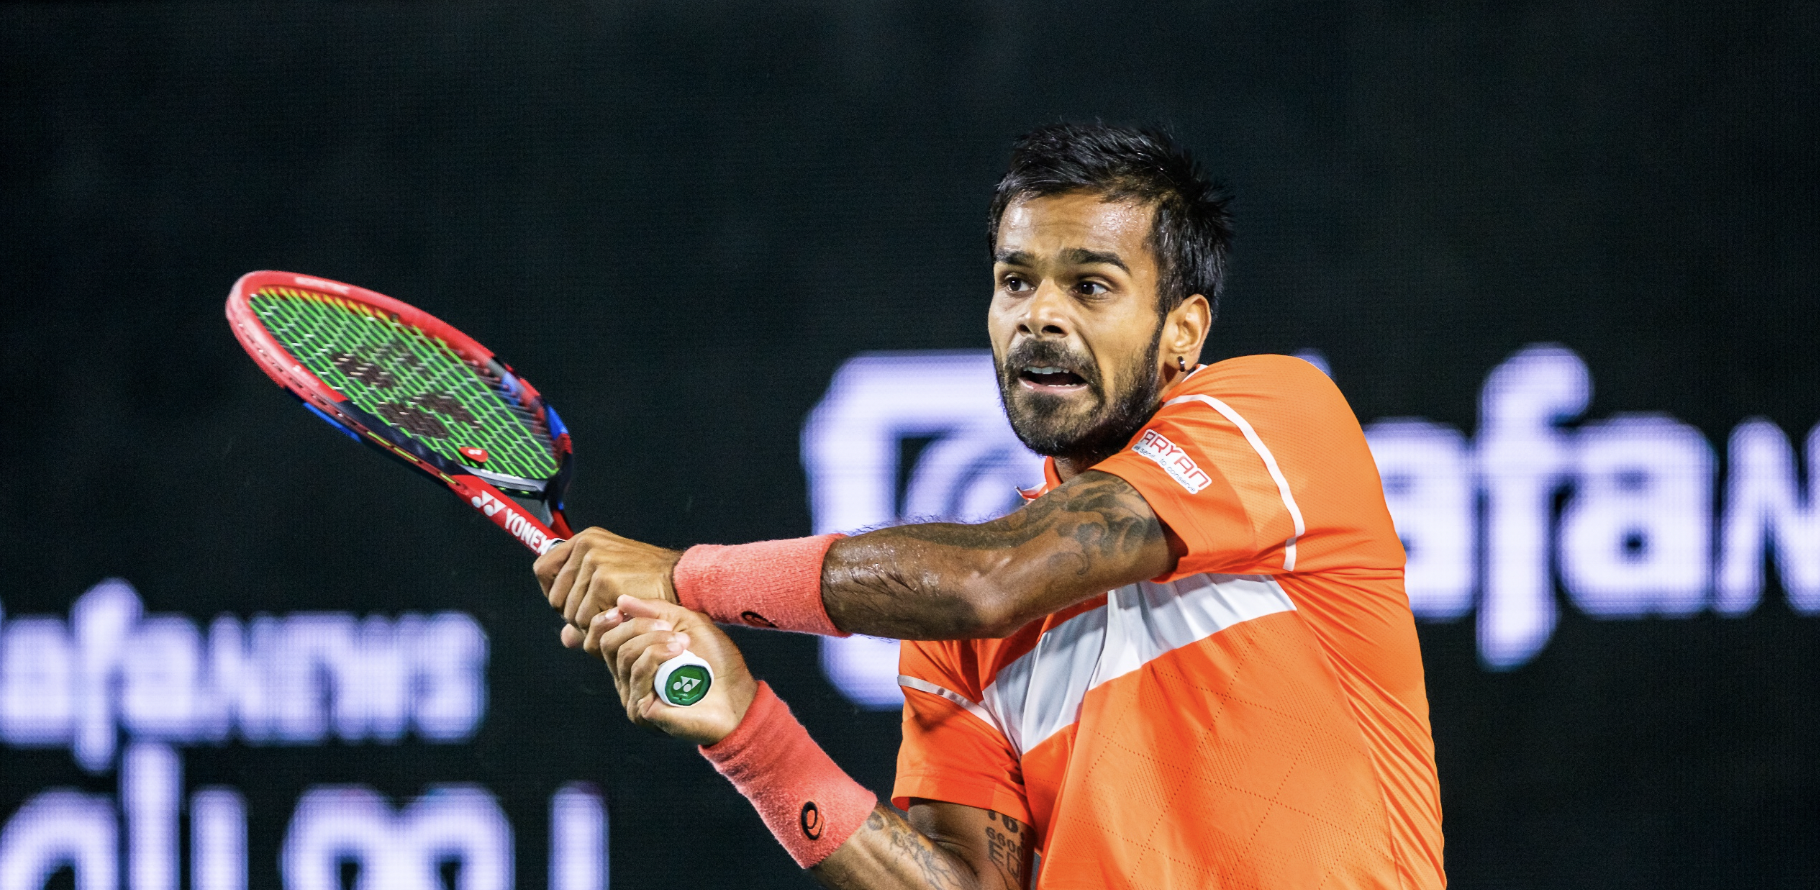 Sumit Nagal receives Dubai wildcard; to face L.Sonego in Round 1